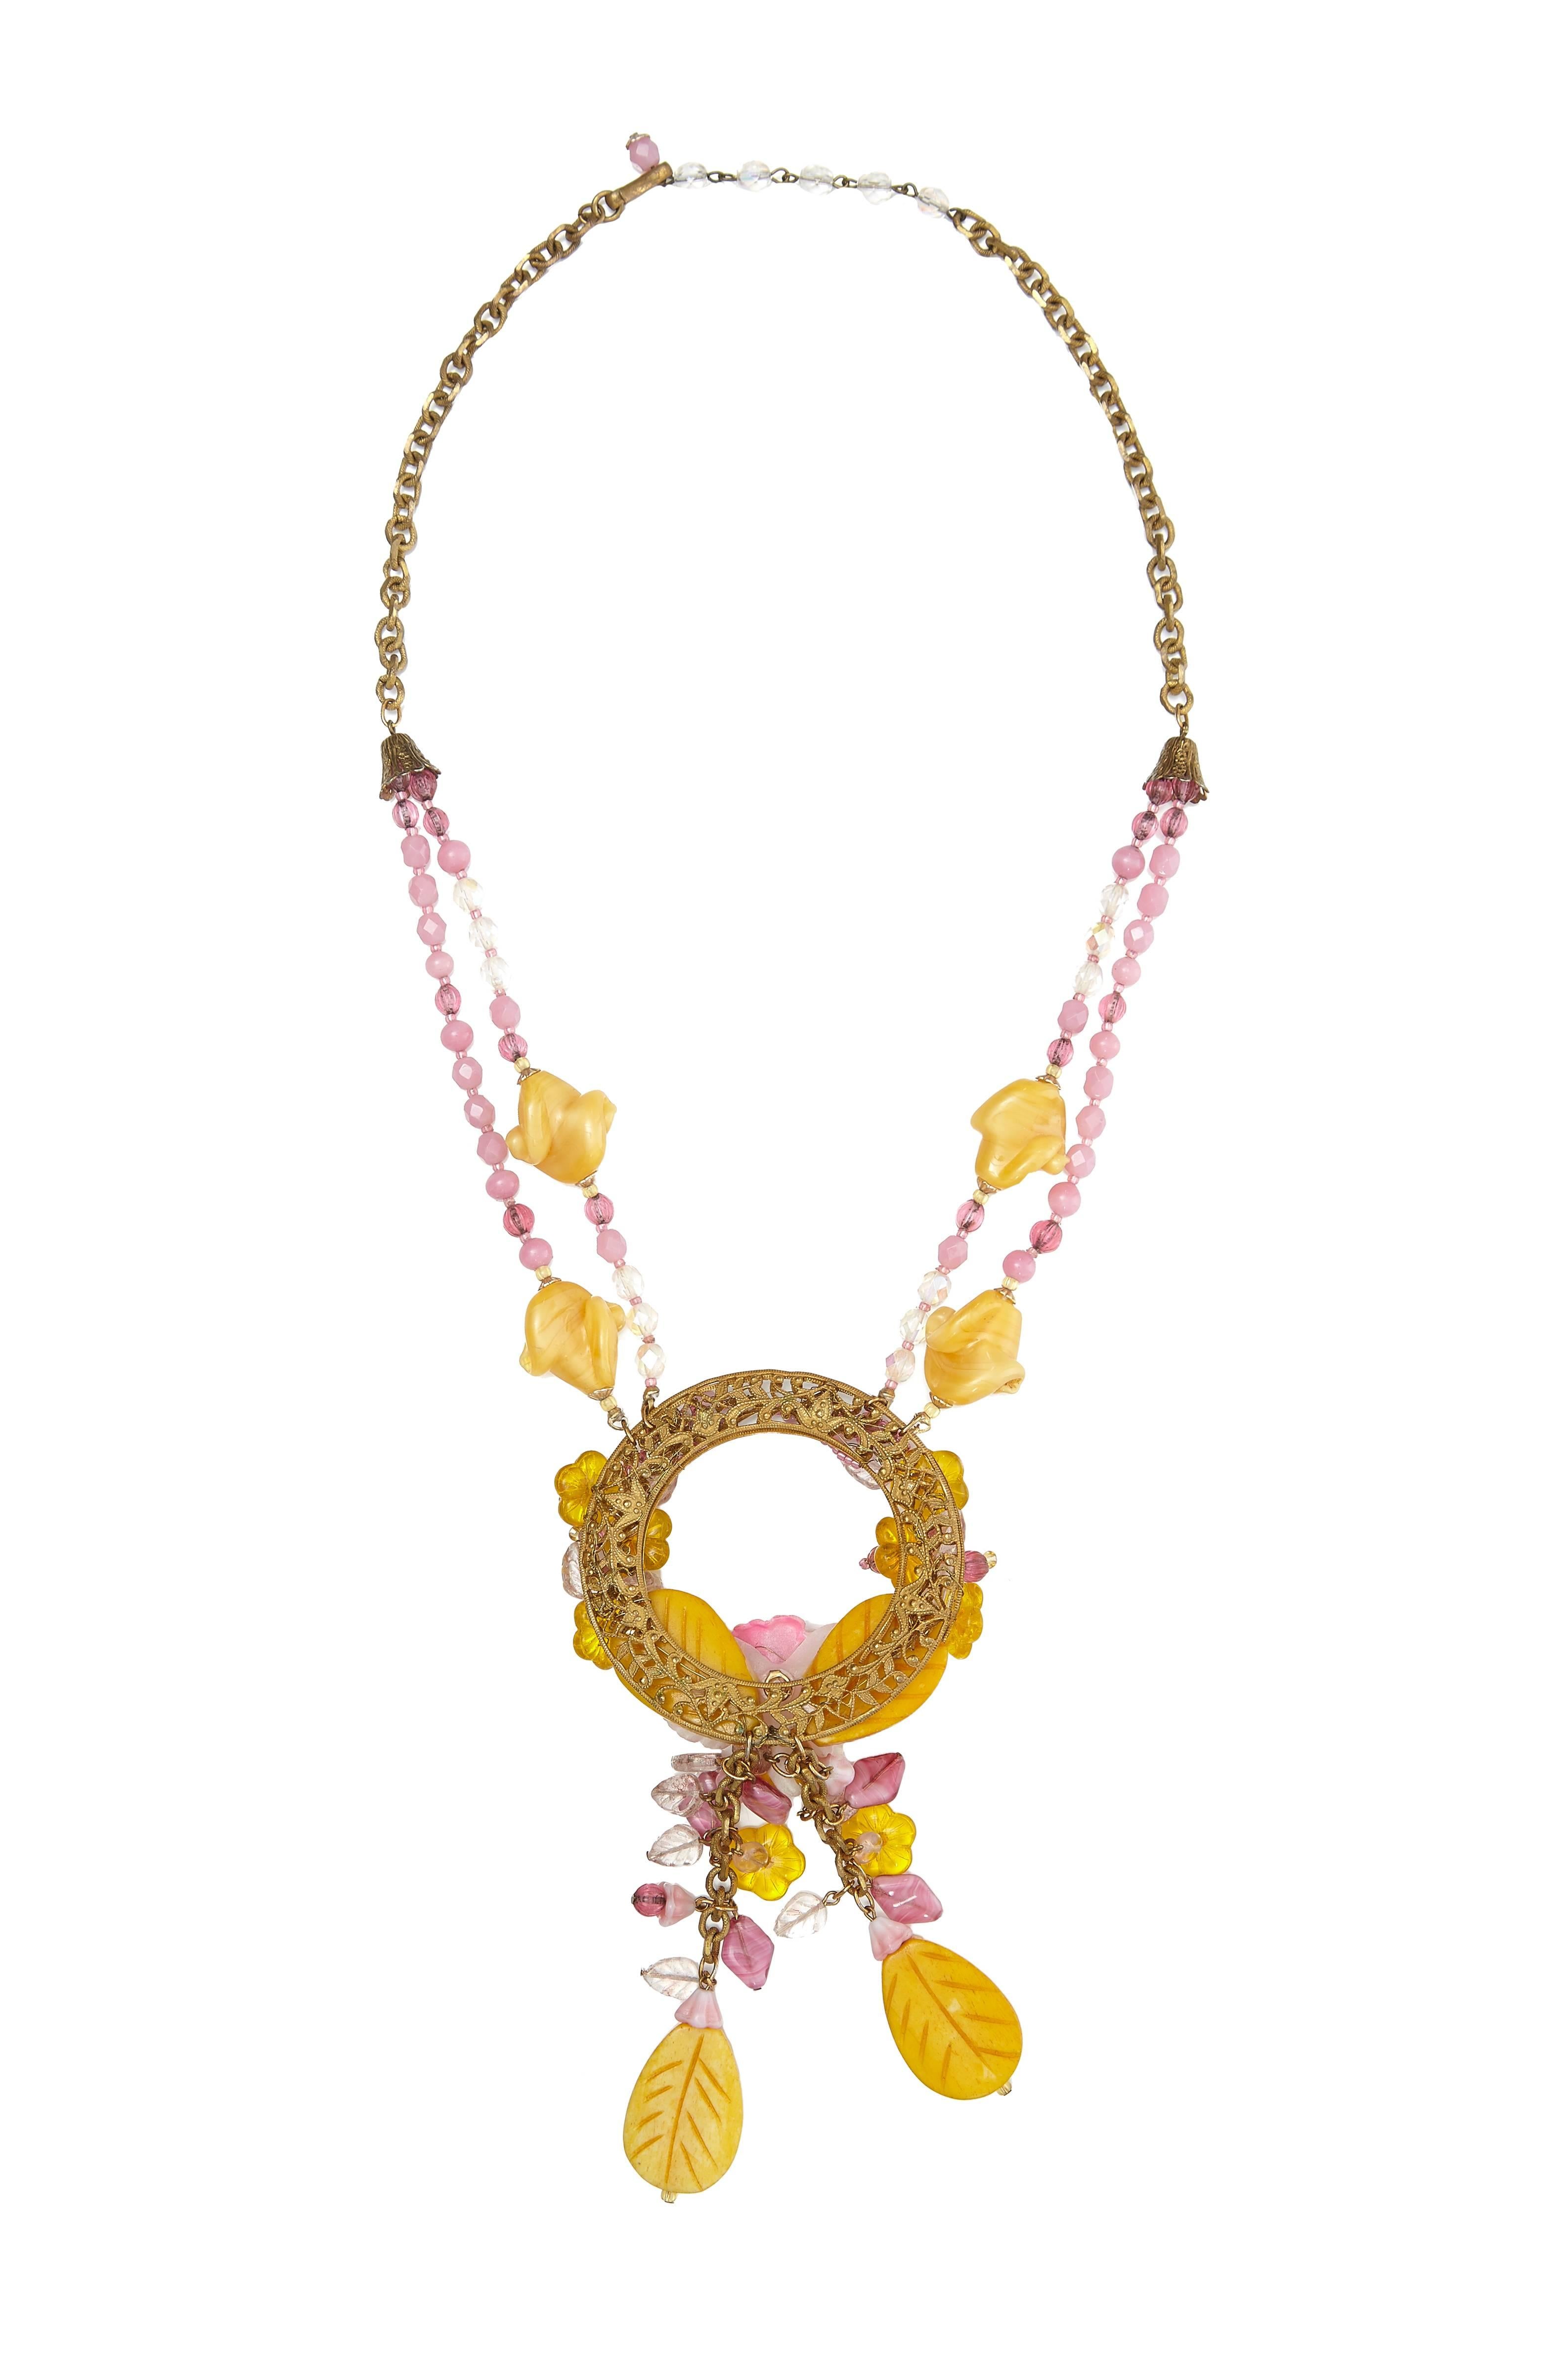 Original 1960s Miriam Haskell pink and yellow glass beaded necklace with gold tone chain.  This bold and spectacular piece features chains and beads hanging down from a large central hoop with a pretty floral design and an orchid as the central